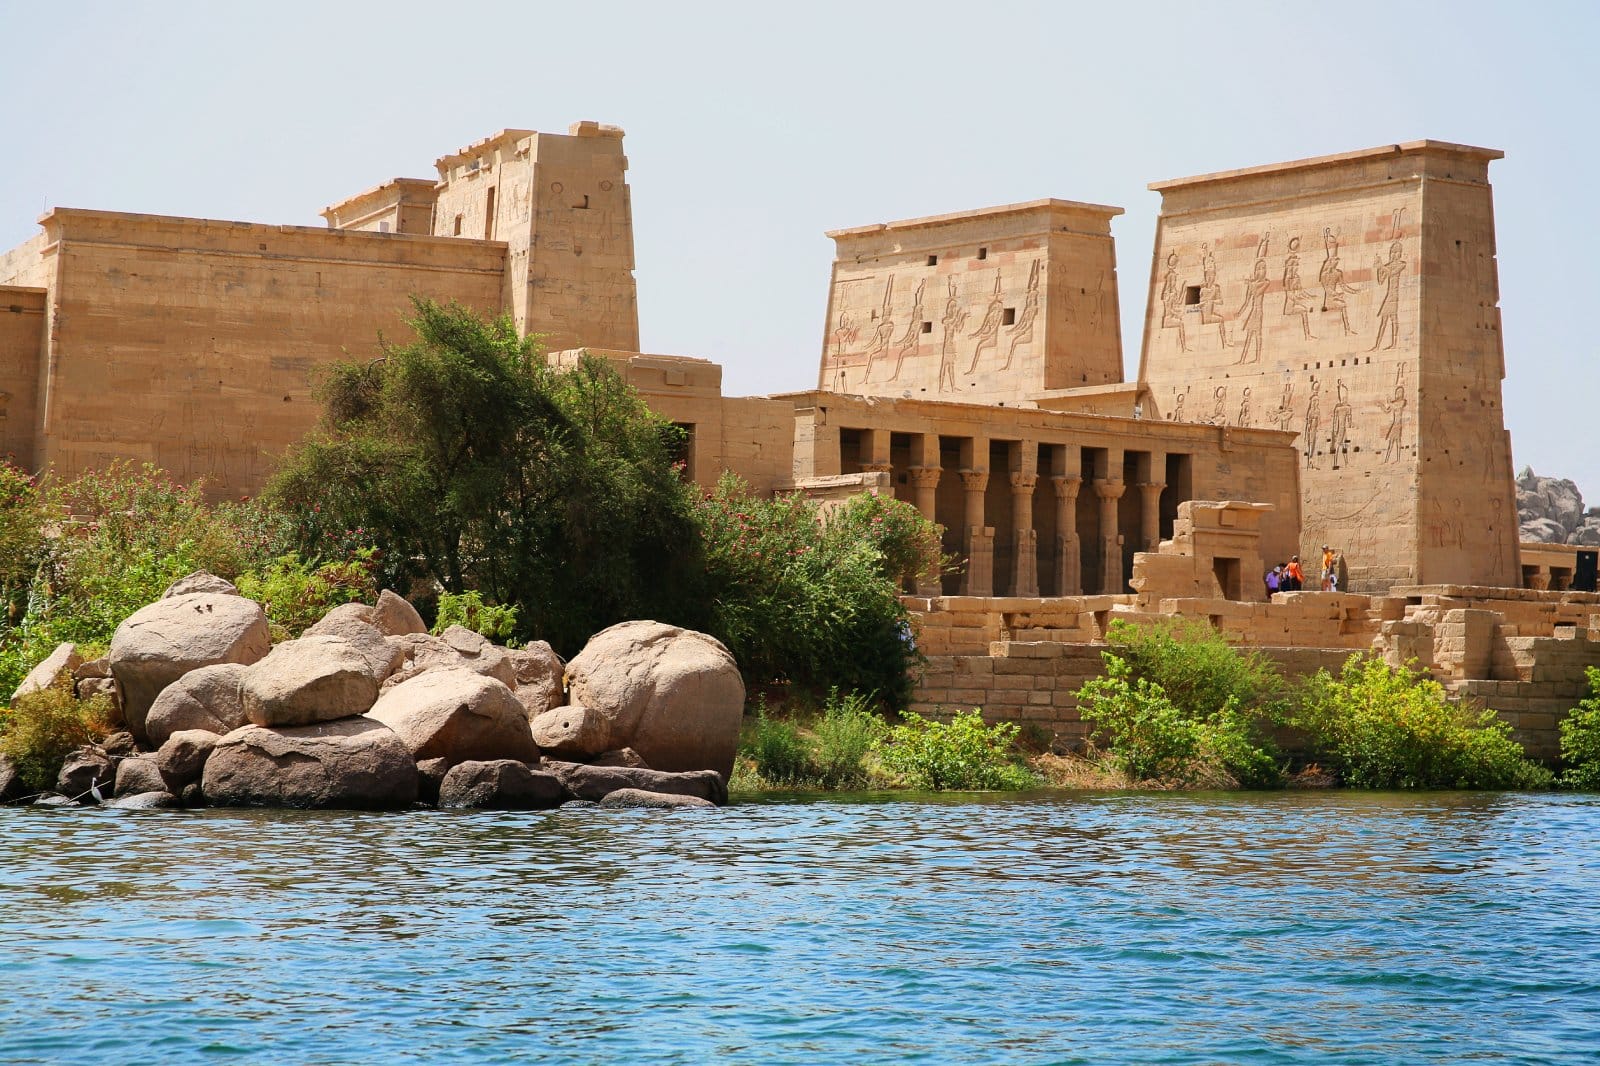 <p class="wp-caption-text">Image Credit: Shutterstock / Certe</p>  <p><span>Aswan, set upon the tranquil bends of the Nile far south of Cairo, offers a more serene and picturesque side of Egypt. This city, with its Nubian culture, colorful sails dotting the river, and islands lush with palm groves, stands in contrast to the ancient grandeur of much of the country. The Temple of Philae, dedicated to the goddess Isis, embodies Egyptian civilization’s resilience and enduring beauty. Relocated to Agilkia Island as part of a monumental UNESCO project to save it from the floods caused by the Aswan Dam, the temple complex is a historical and architectural feat. Visitors are often captivated by the temple’s intricate reliefs and the romantic setting on the island. With its slower pace of life, Aswan offers a chance to unwind and soak in the beauty of the Nile’s landscapes, making it a perfect blend of relaxation and exploration.</span></p>